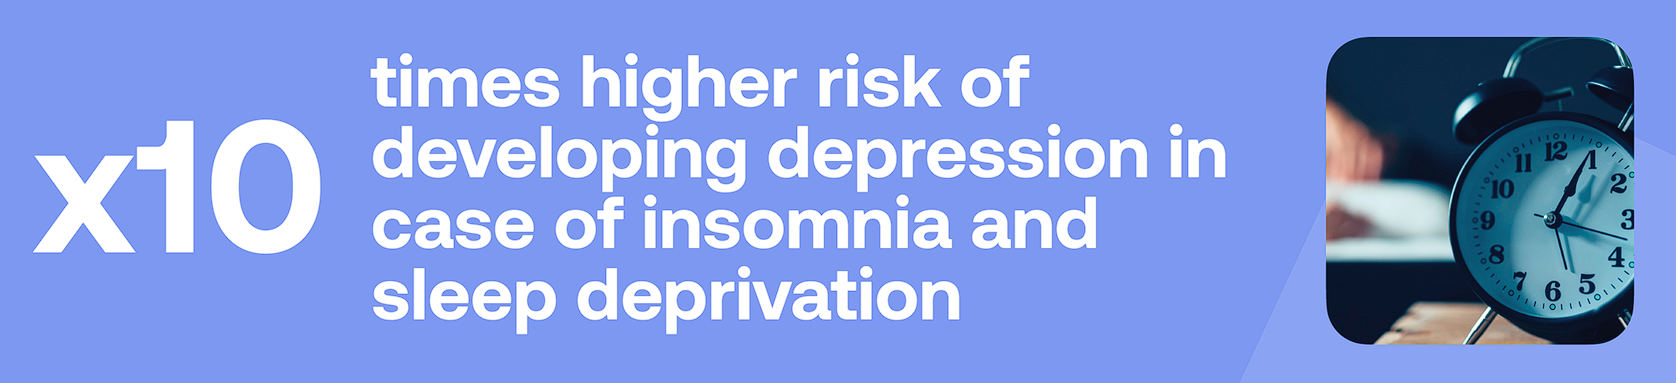 x10 times higher risk of developing depression in case of insomnia and sleep deprivation